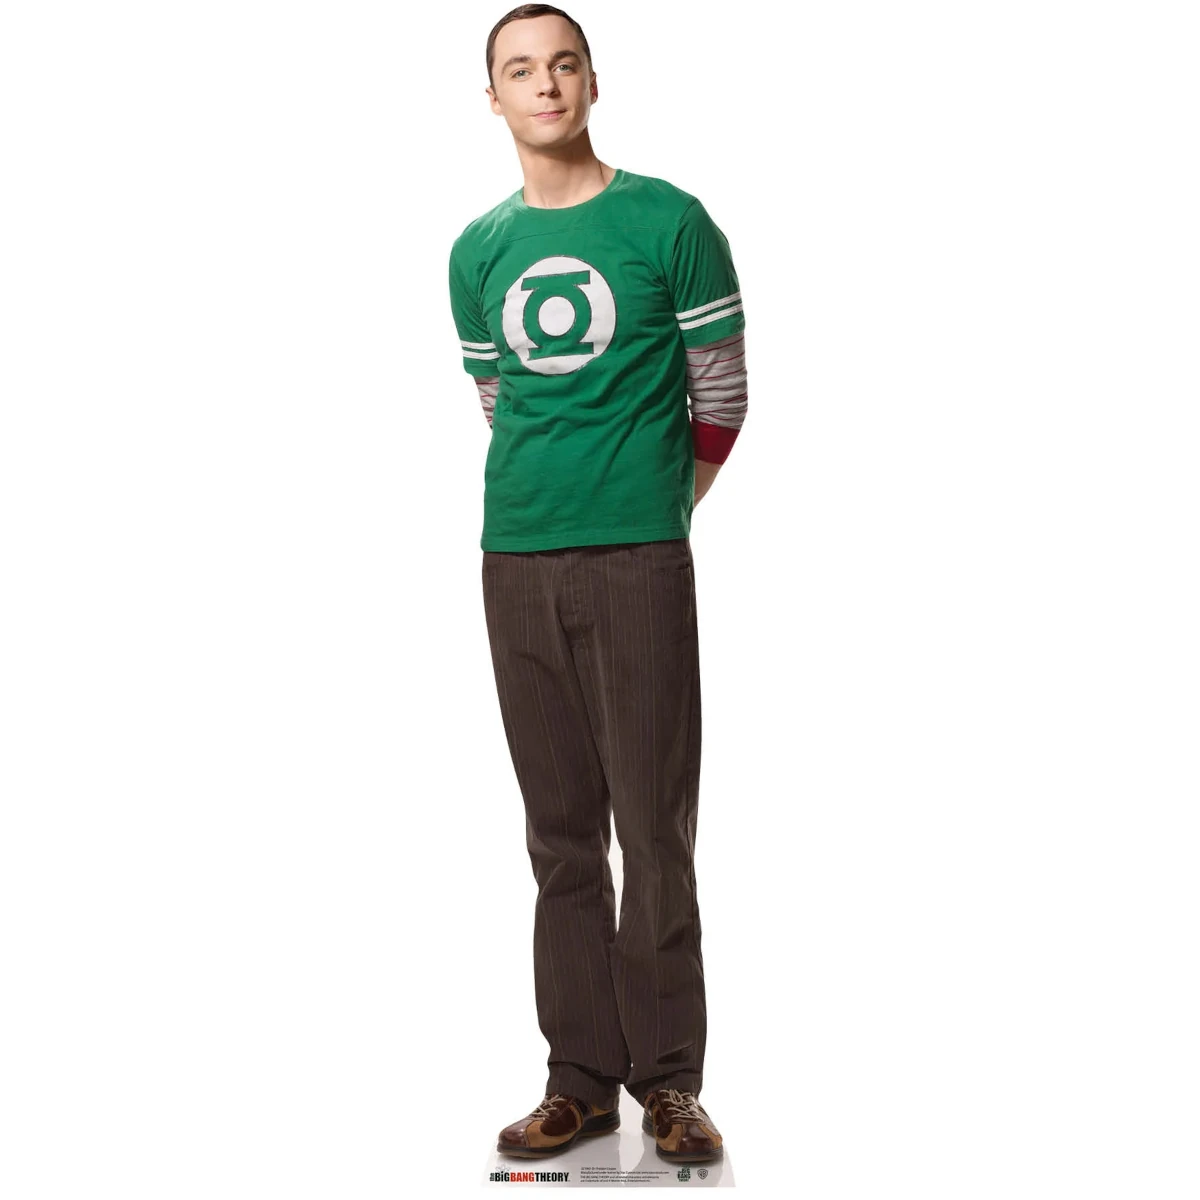 SC1960 Dr Sheldon Cooper (The Big Bang Theory) Official Mini Cardboard Cutout Standee Front